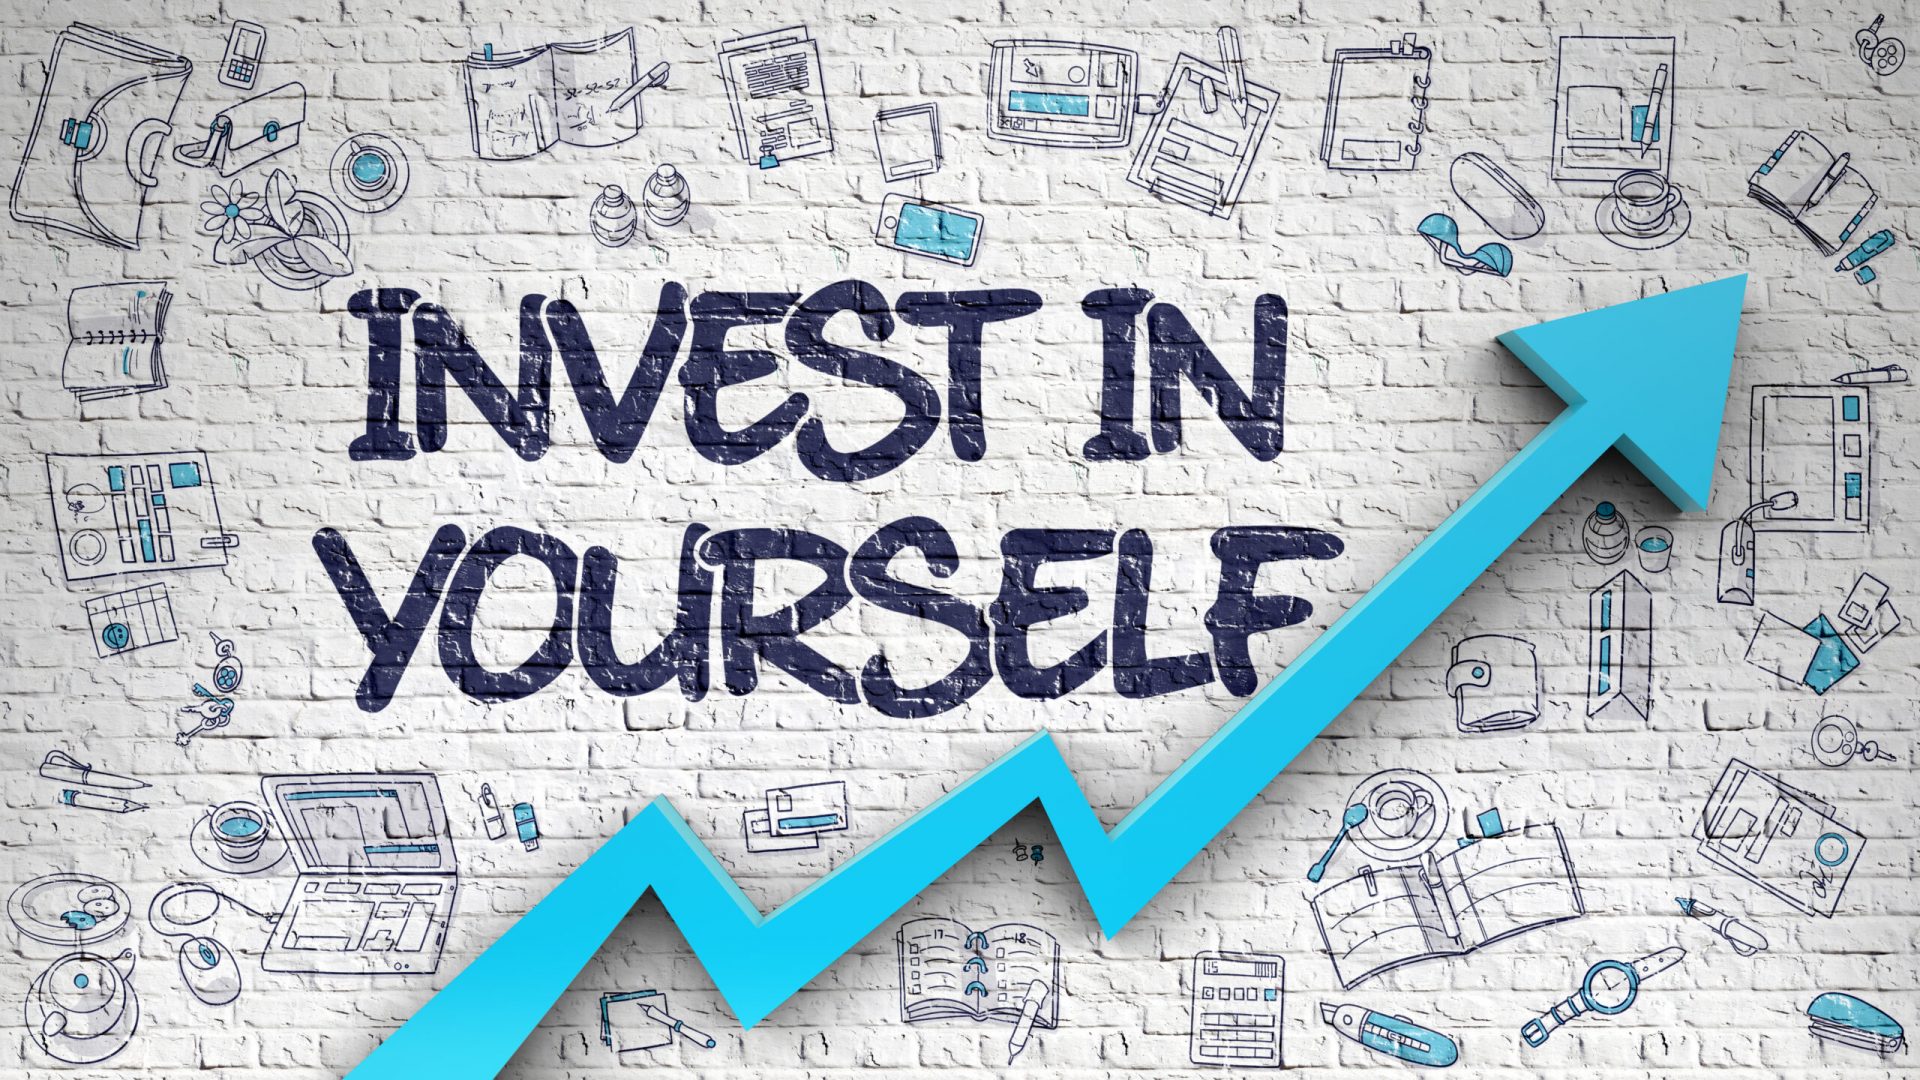 Invest In Yourself Drawn on White Brick Wall